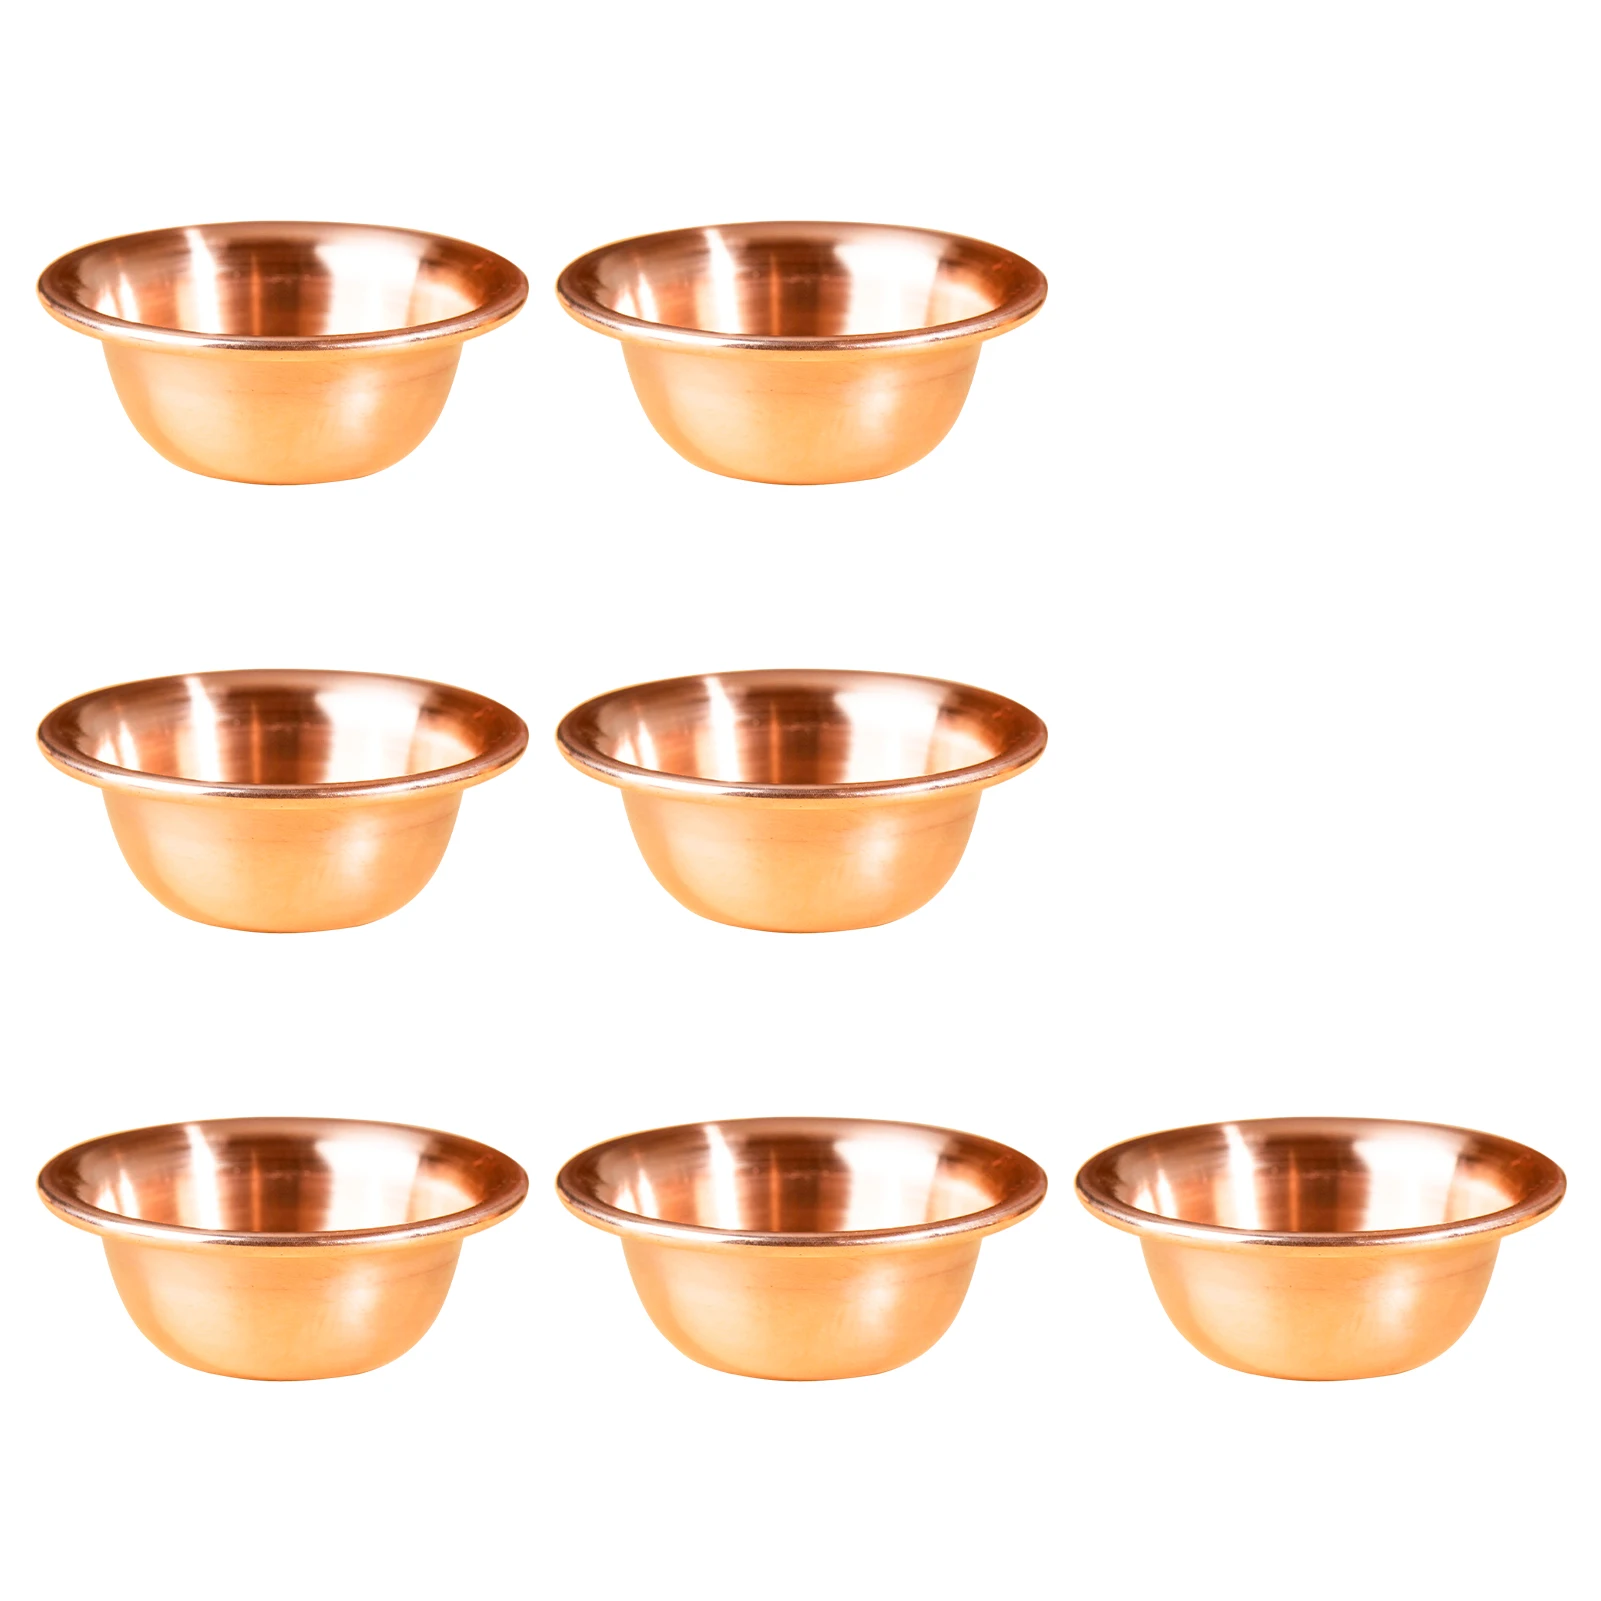 7pcs Smudging Home Decor Tibetan Buddhist Red Copper Round Yoga Gift Temple Portable Offering Bowl Burning Incense Ritual Craft